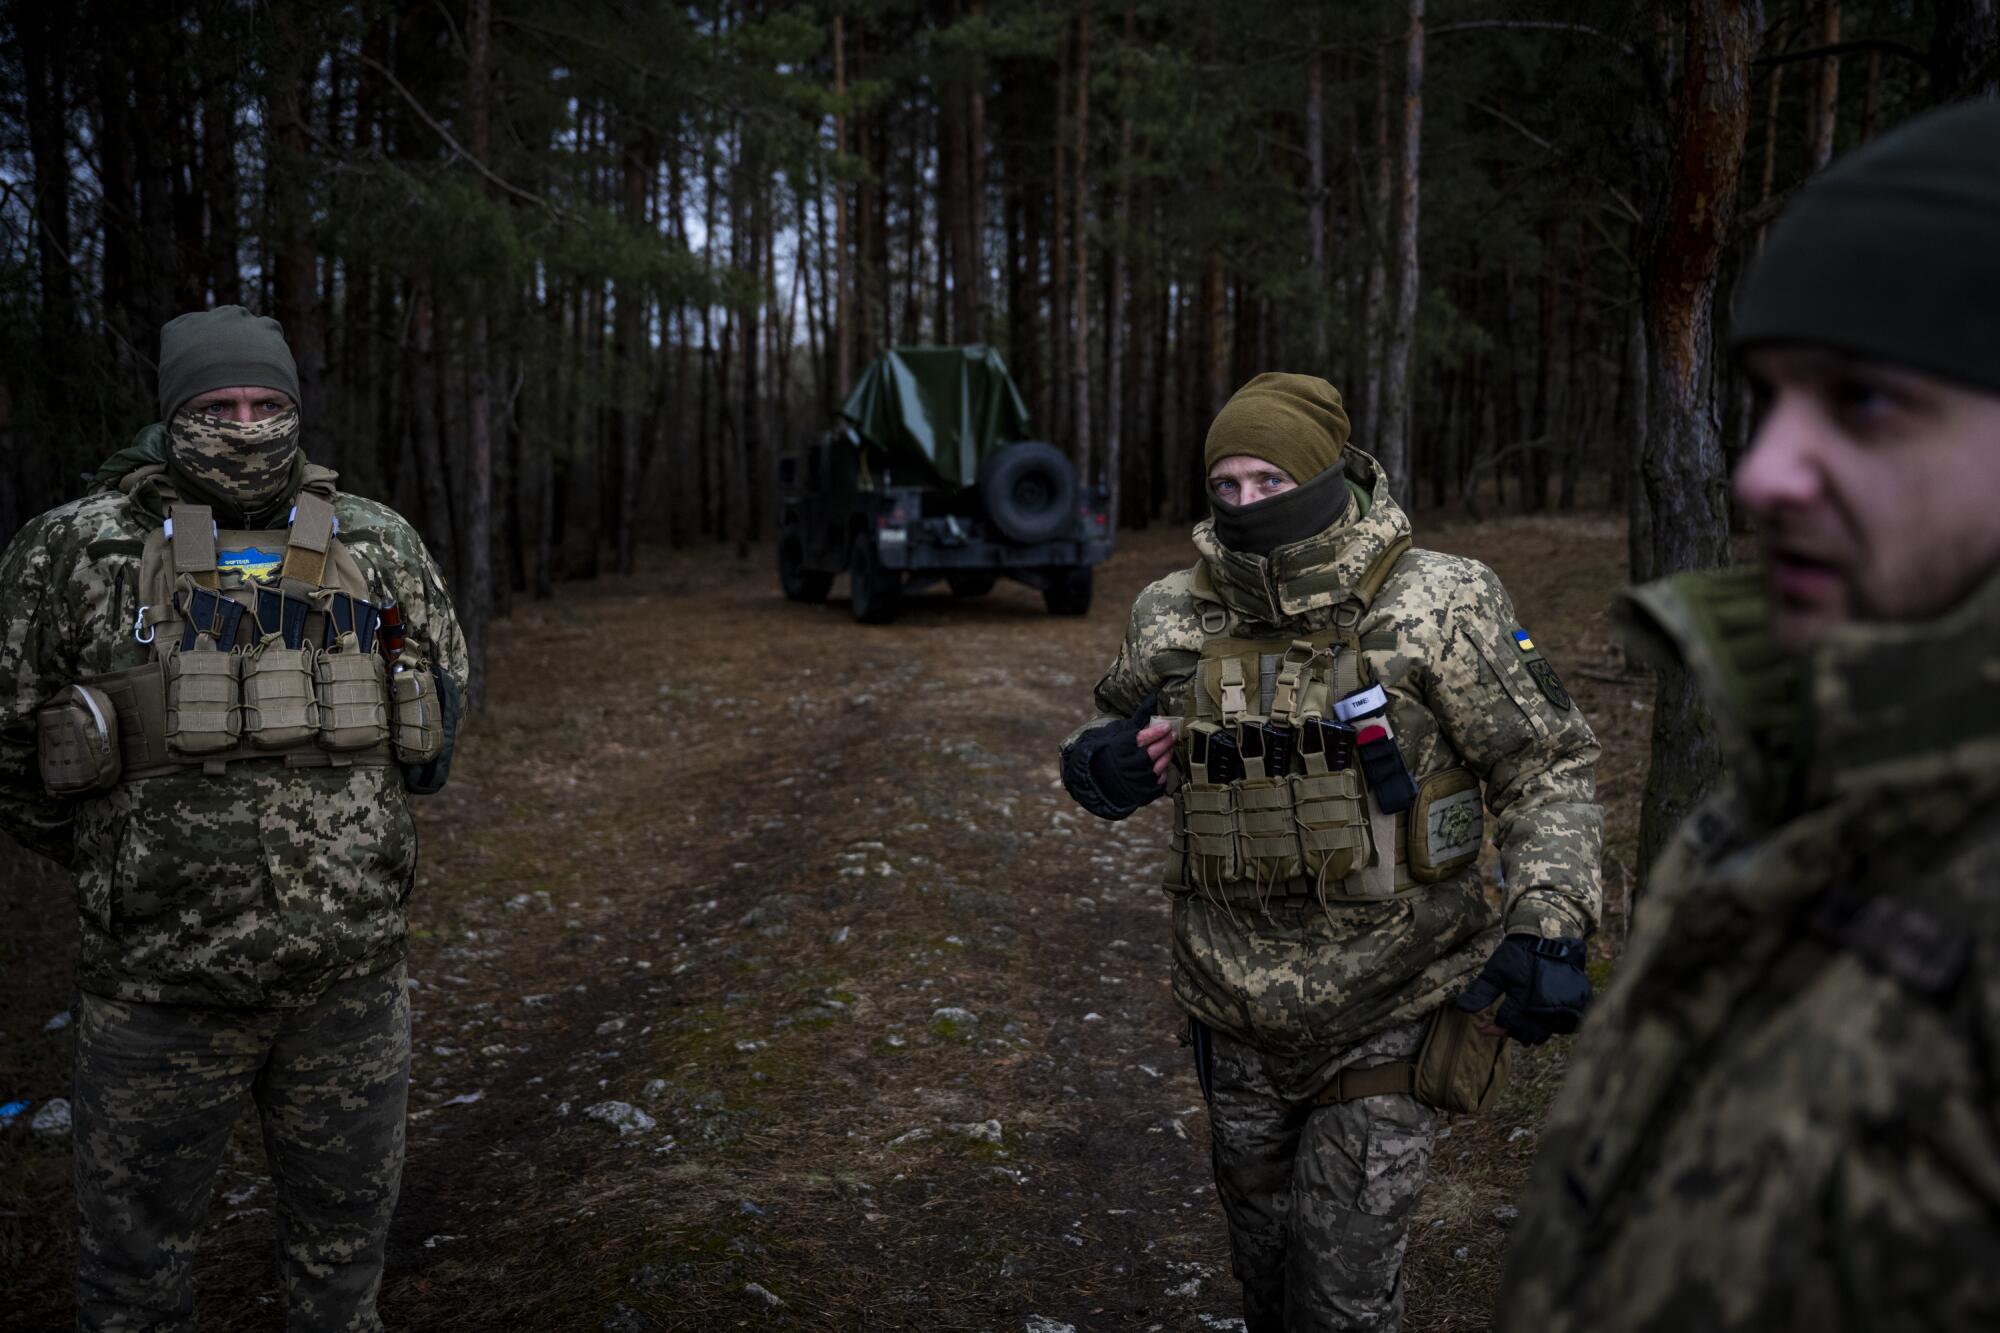 Troops in camouflage fatigues, beanies and balaclavas standing in a forest with military equipment in the background